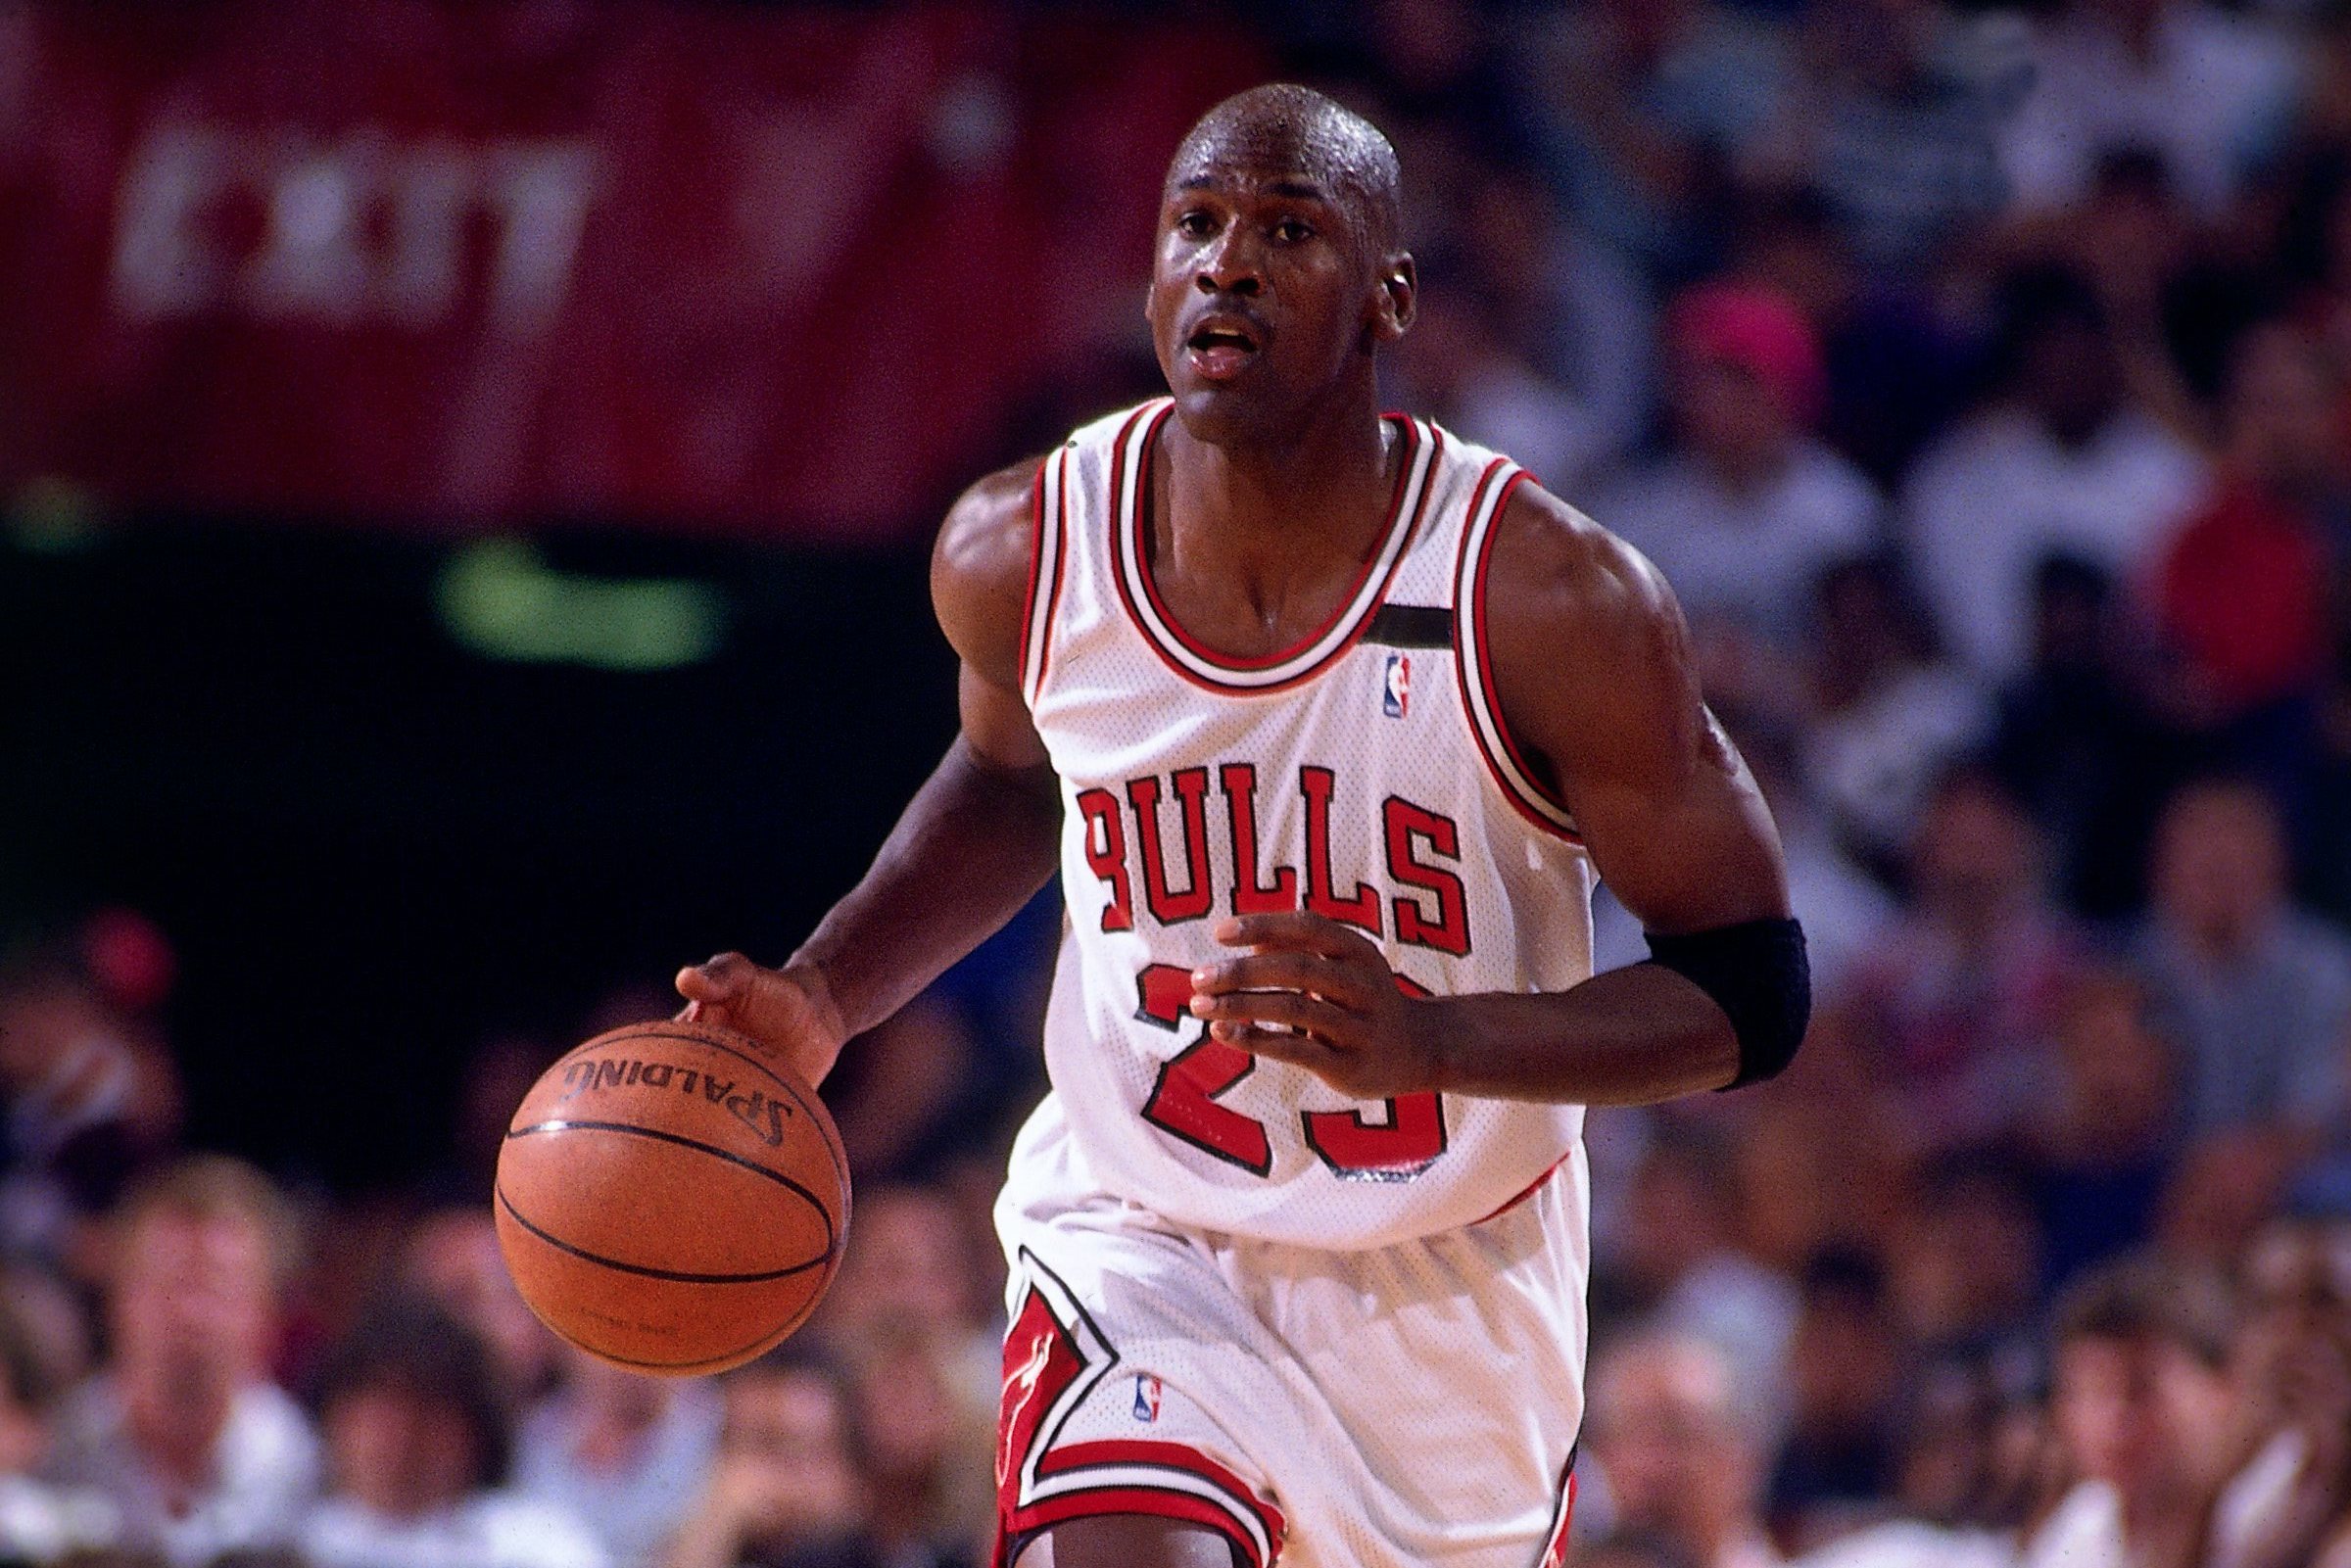 NBA at 75: From MJ to LBJ, Jamison saw 'greatness' in 2000s